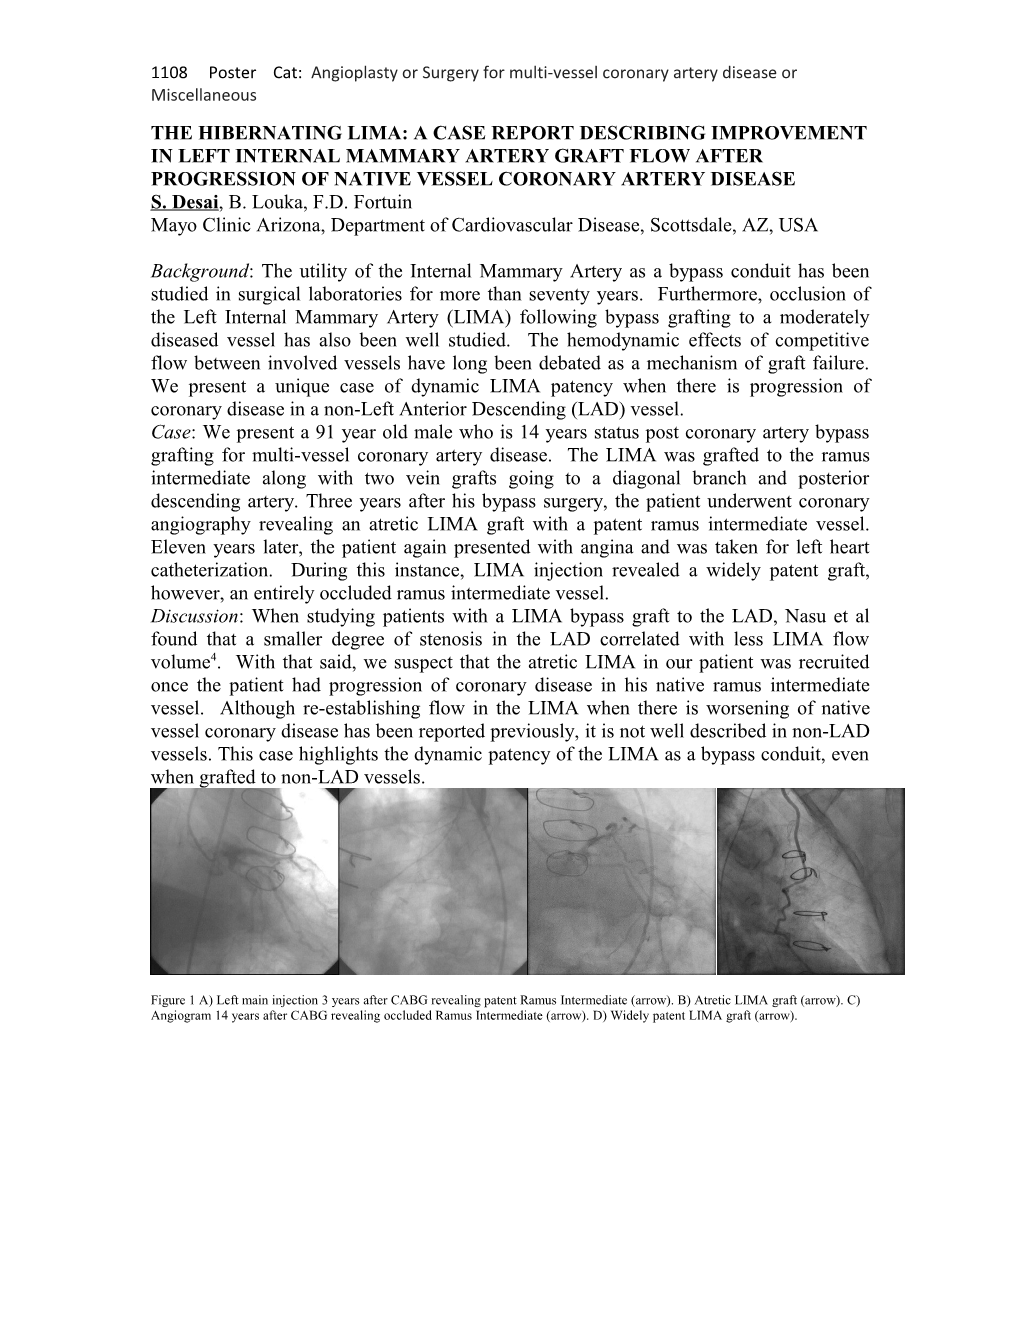 1108 Poster Cat: Angioplasty Or Surgery for Multi-Vessel Coronary Artery Disease Or